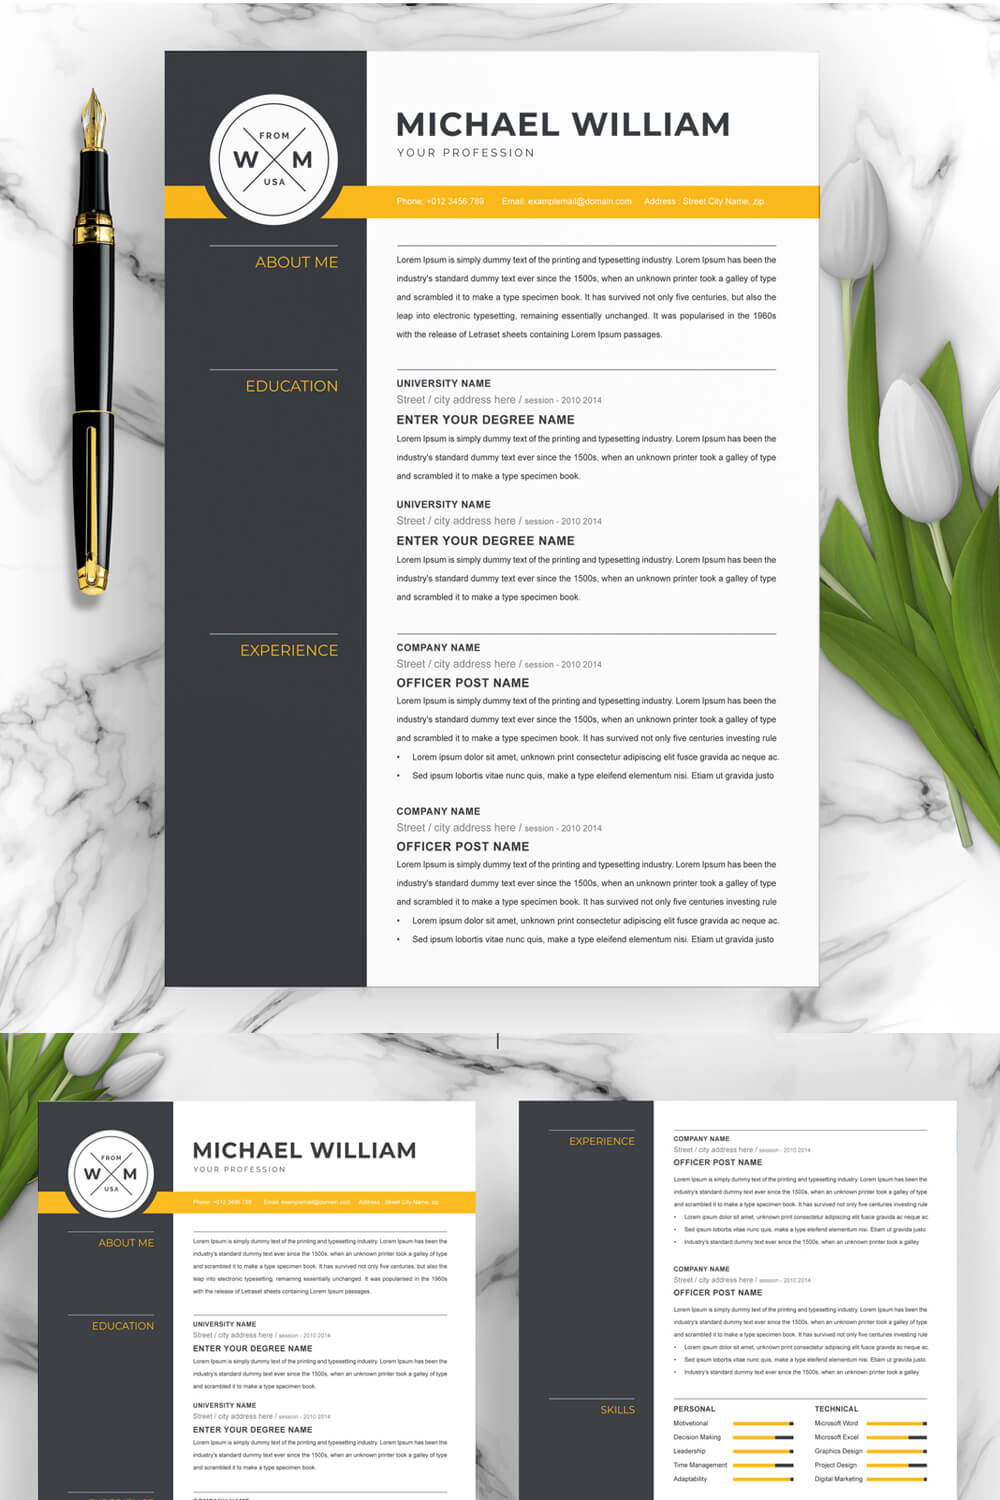 Professional Resume & CV Design Template | CV Template | EPS, PSD, INDD, DOCX & PAGES Format pinterest preview image.